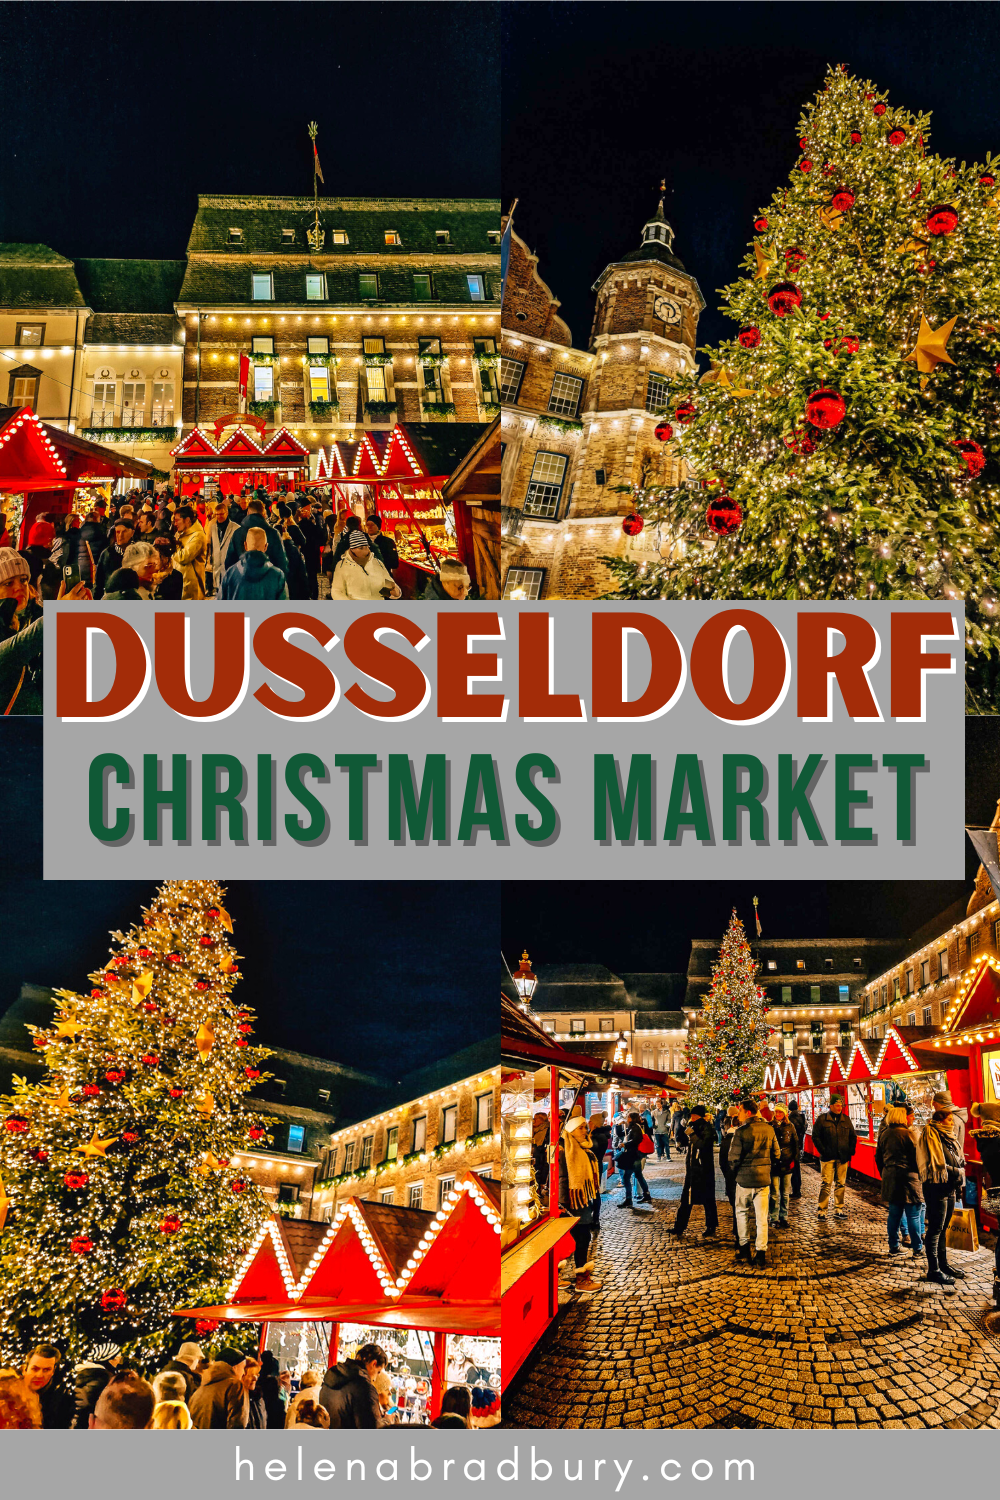 Christmas in Dusseldorf is a truly magical experience! Here’s everything you need to know about planning your trip to Dusseldorf Christmas Markets this year. | dusseldorf christmas market | dusseldorf germany christmas market | dusseldorf aesthetic c